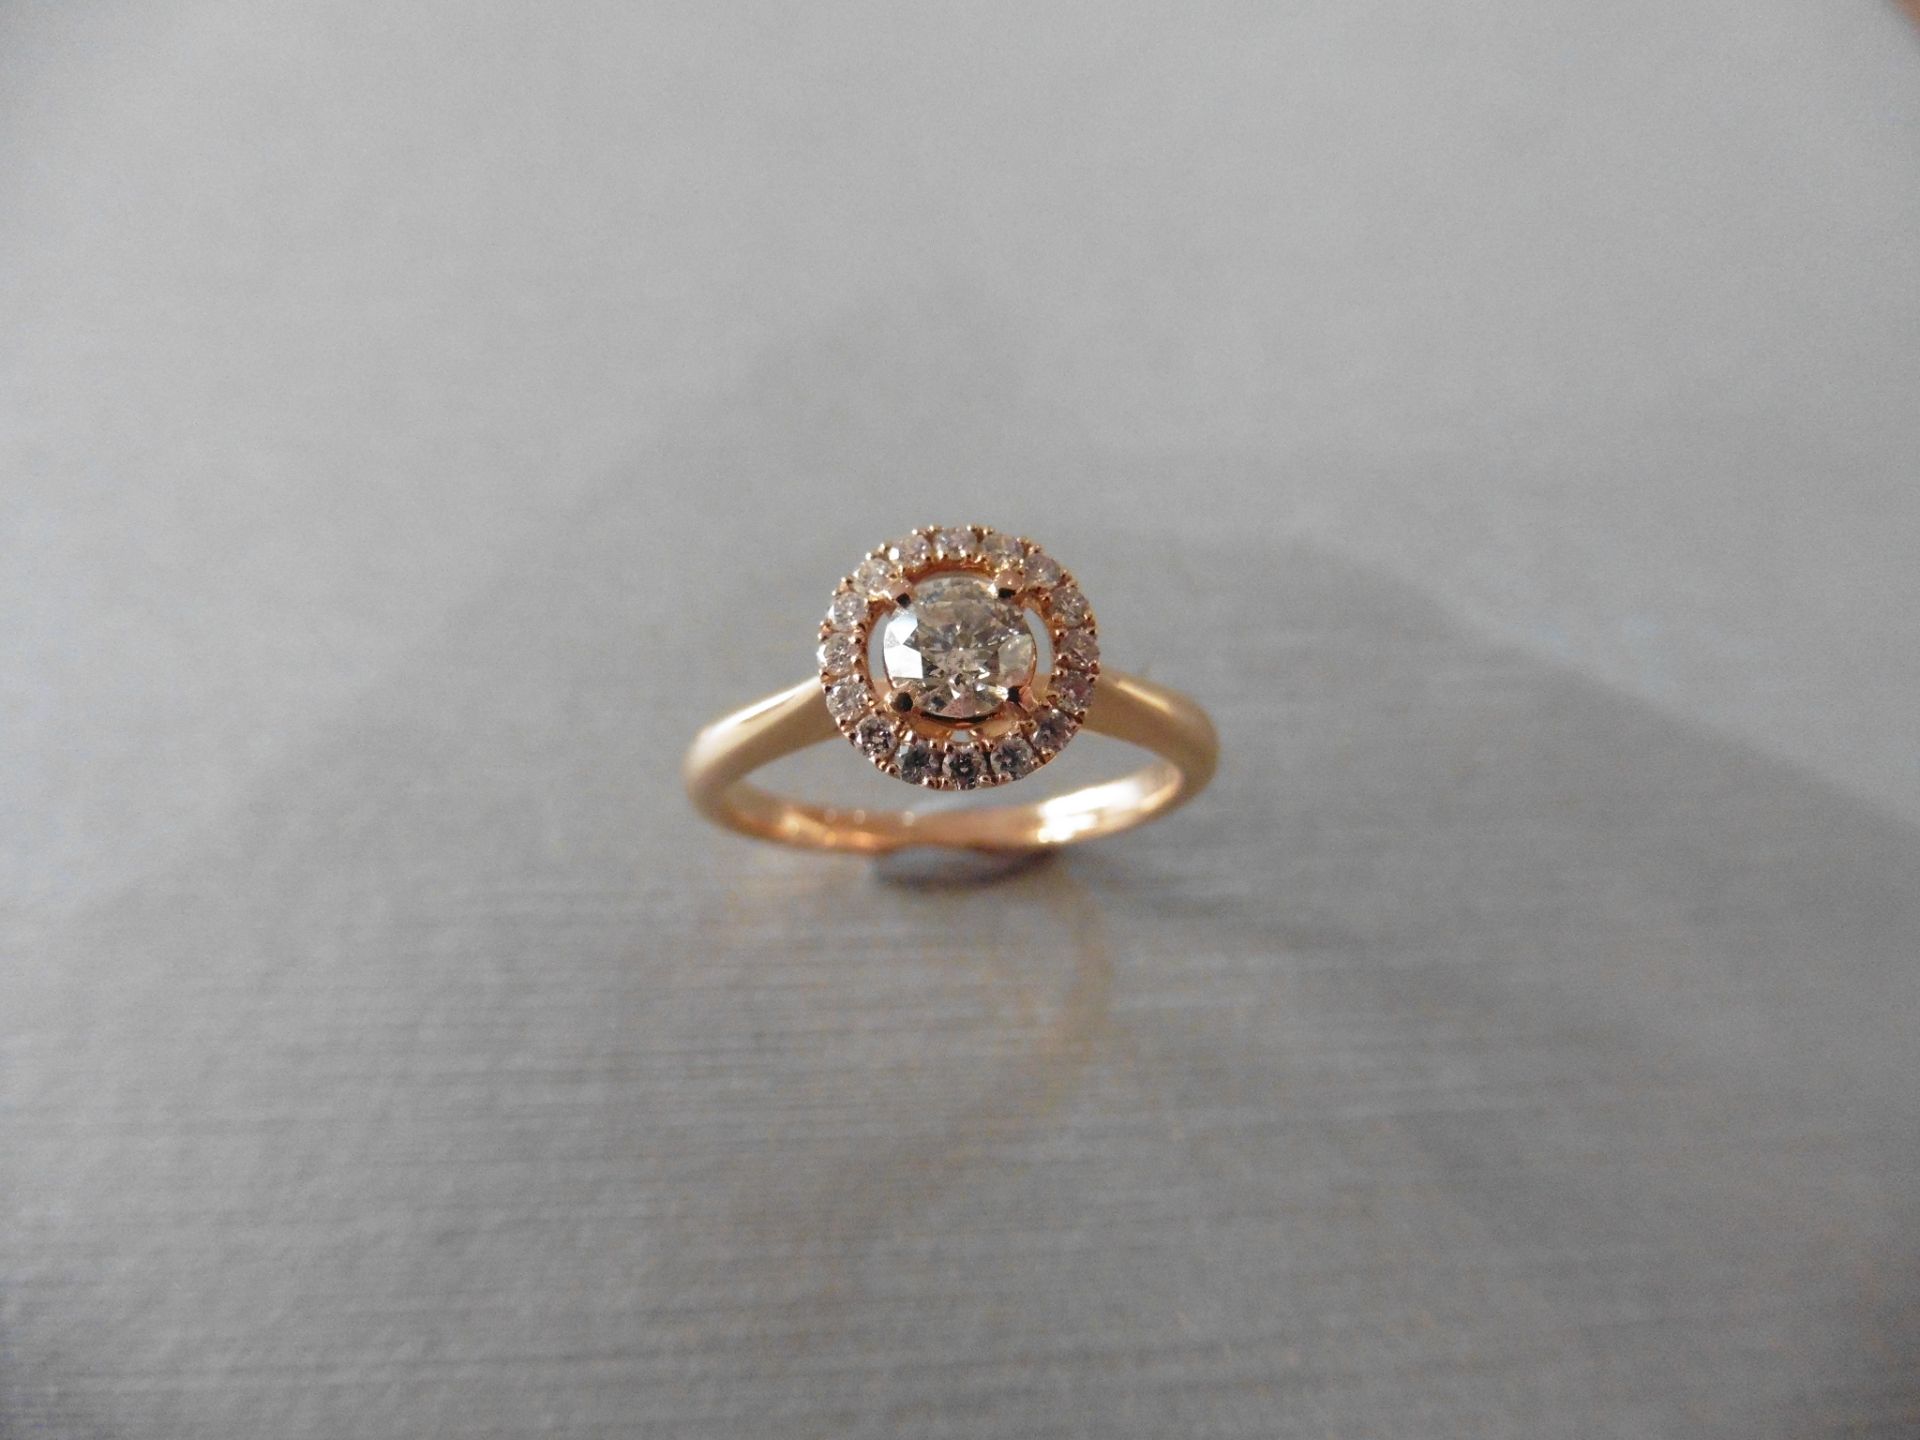 Brand new 18ct rose gold diamond set ring with a 0.30ct brilliant cut diamond, I/J colour which is - Image 4 of 4